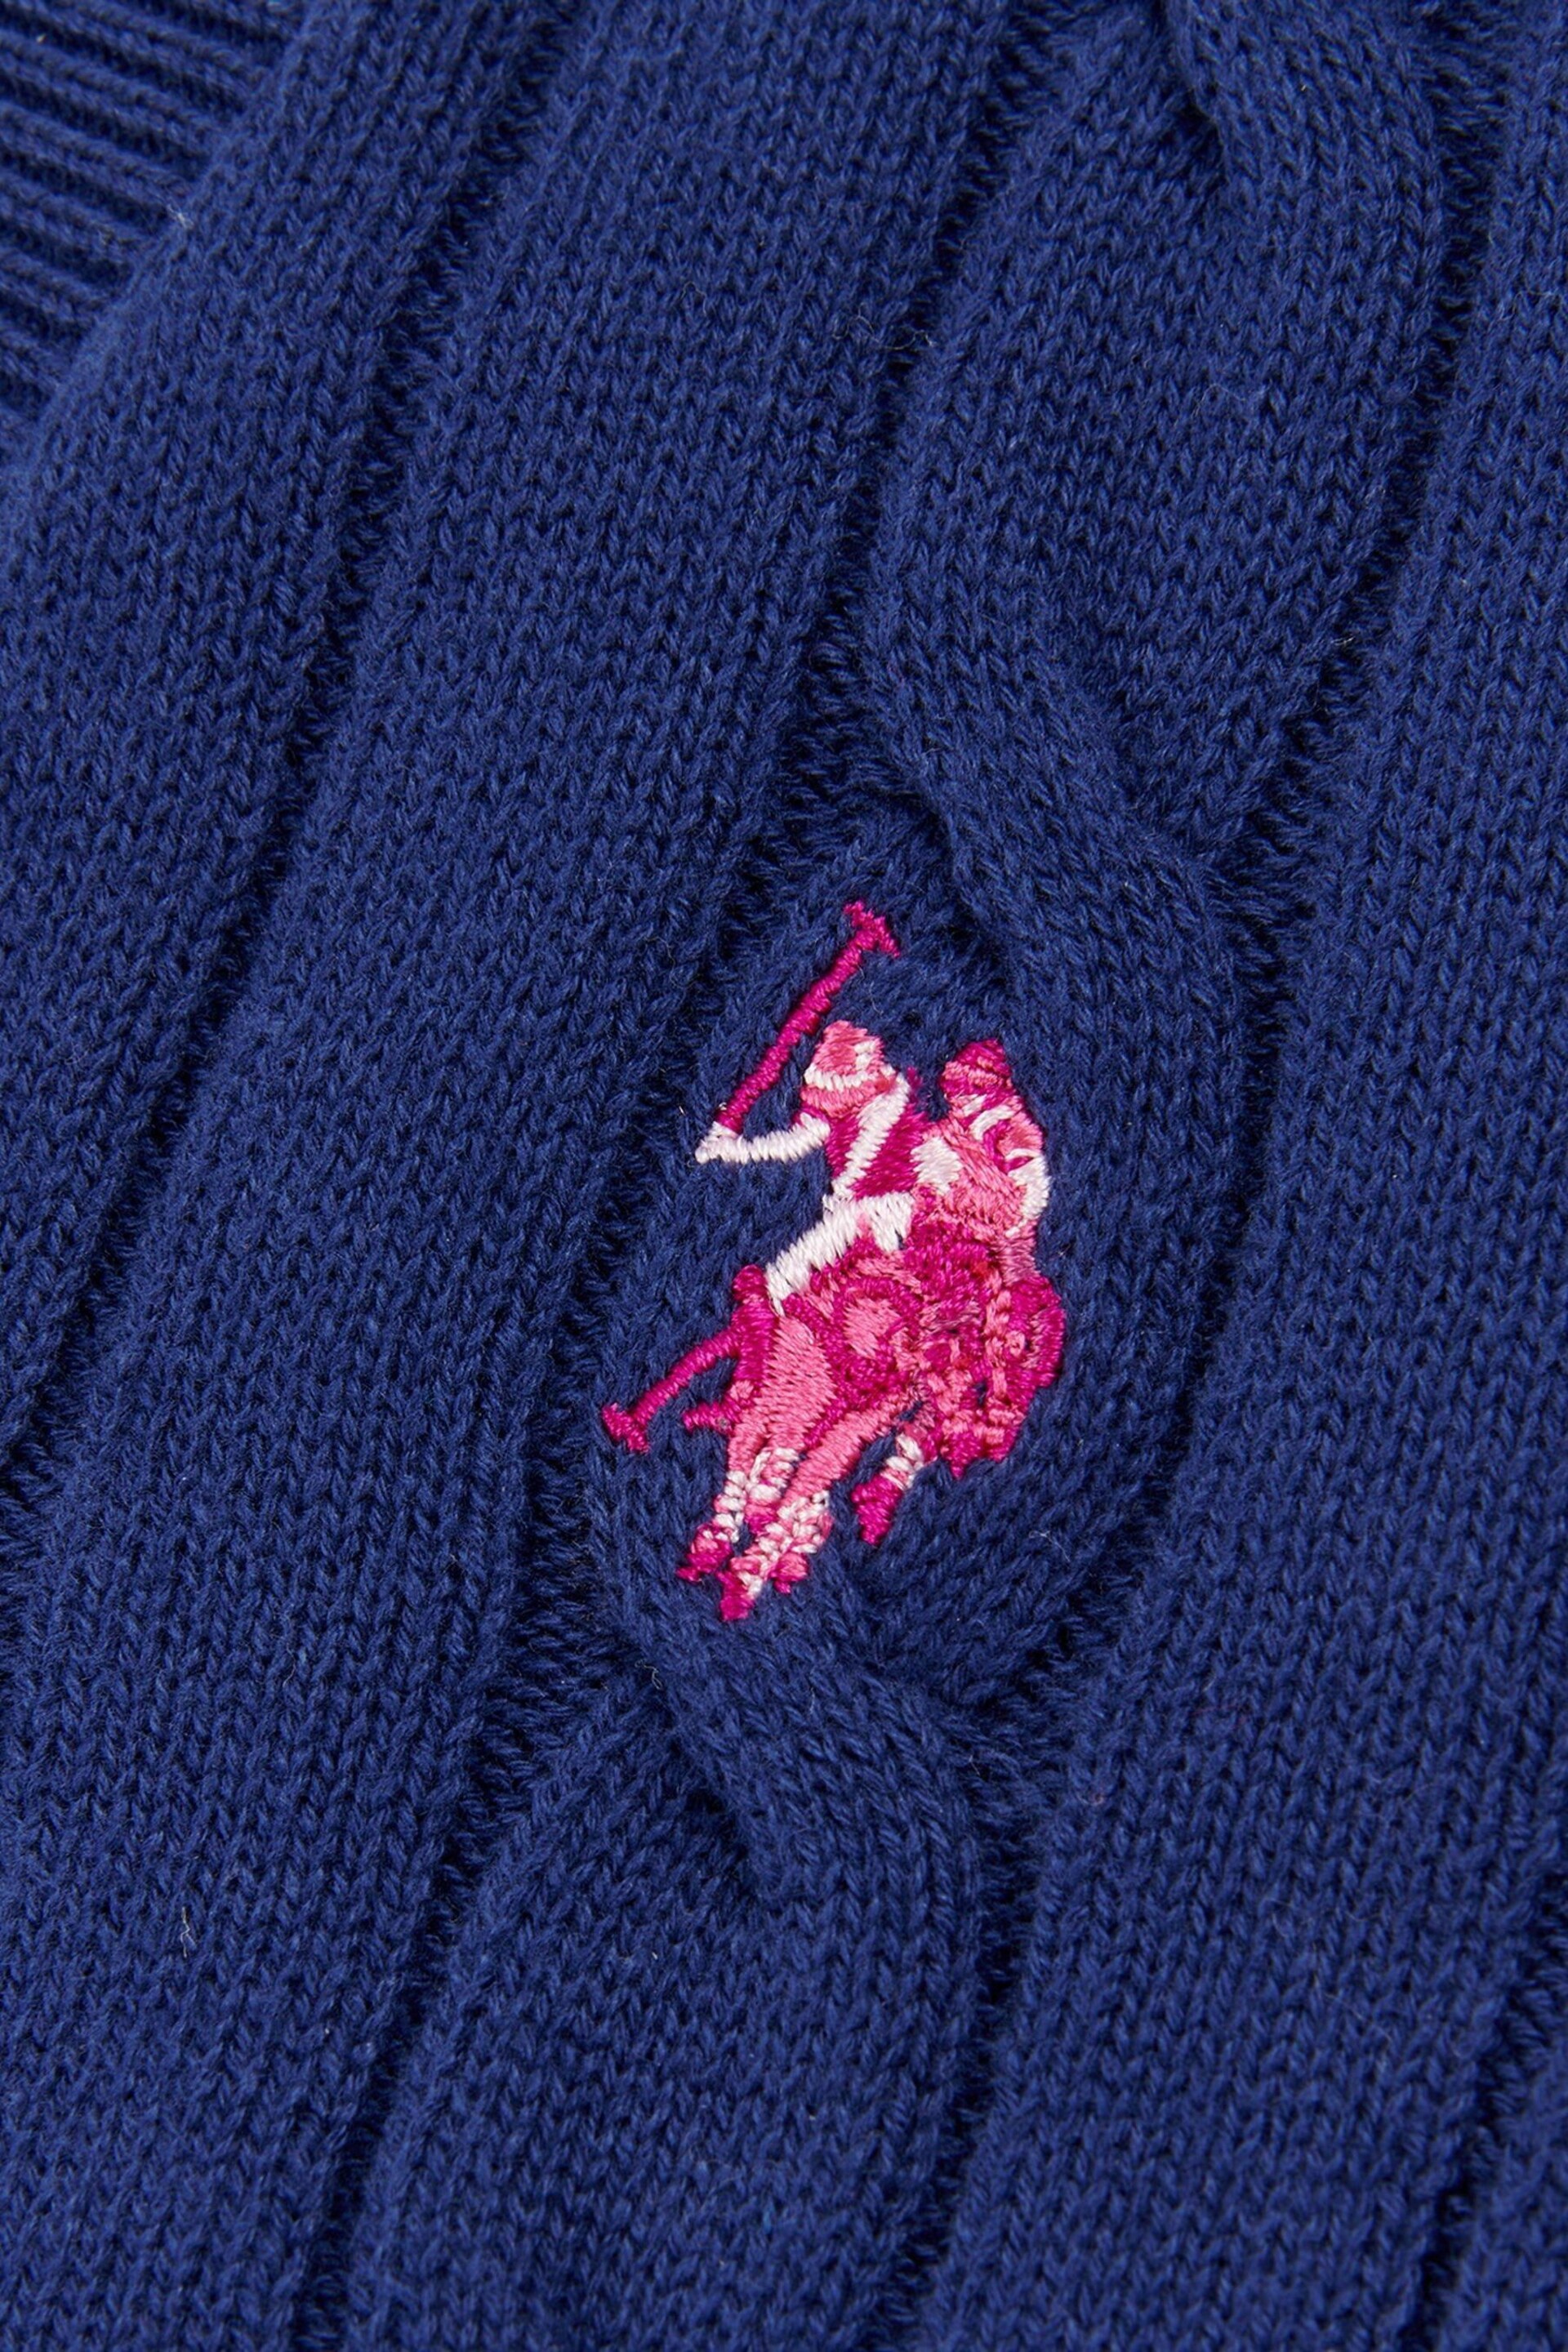 U.S. Polo Assn. Girls Blue Cable Knit Cardigan - Image 3 of 3